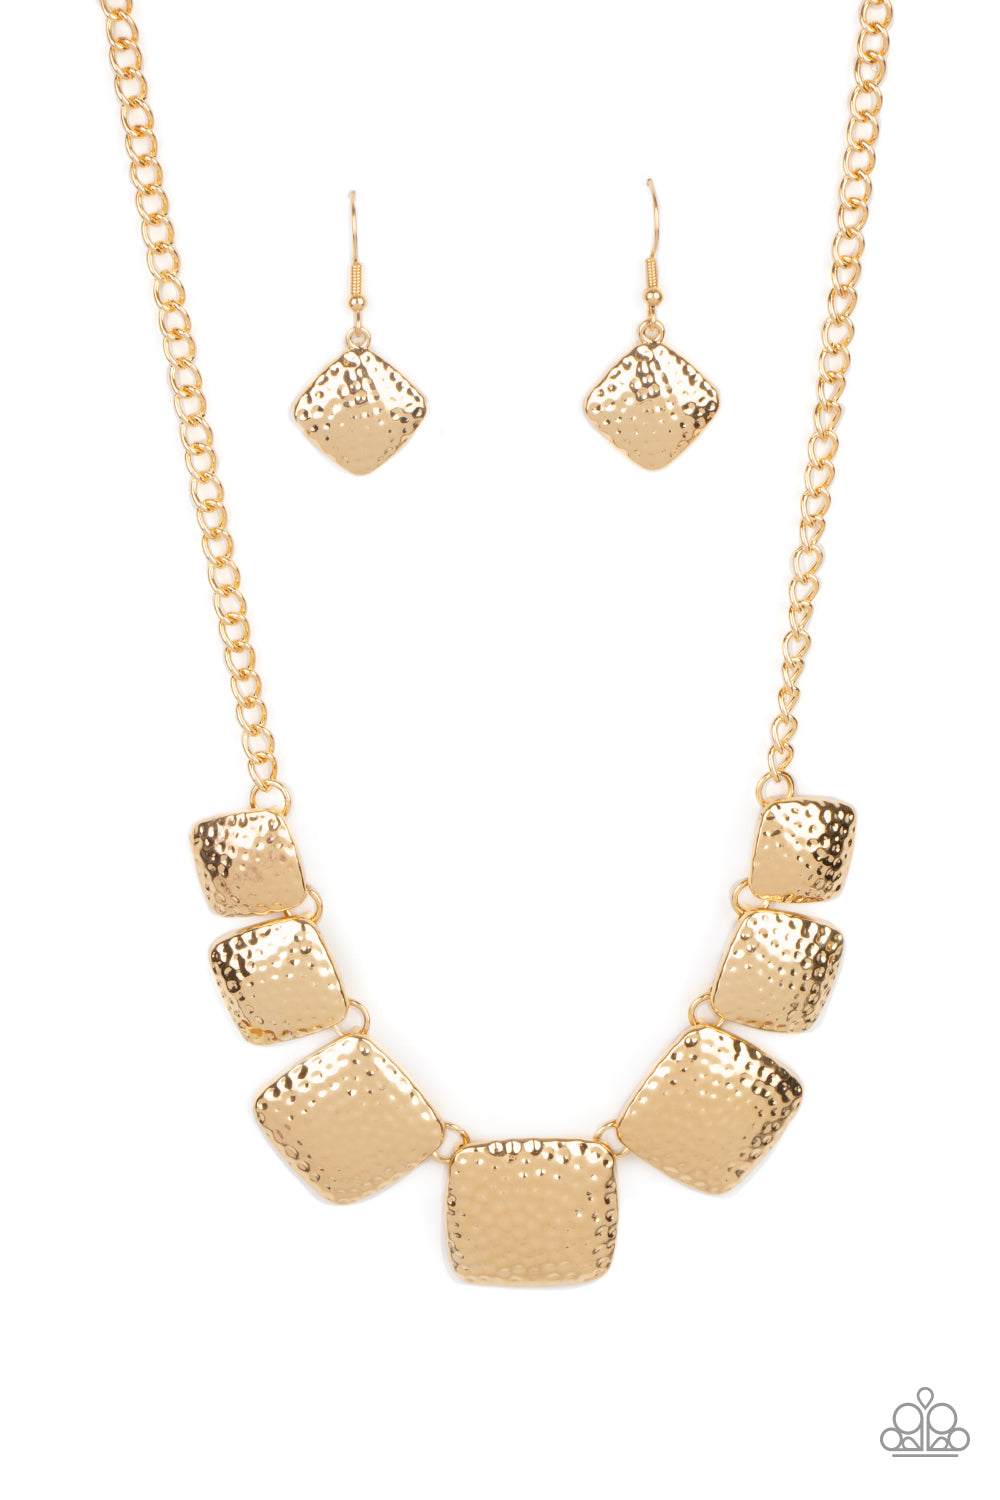 Paparazzi Accessories Keeping it Relic - Gold Necklaces gradually increasing in size near the center, a hammered collection of gold square frames delicately link below the collar for an artisan inspired look. Features an adjustable clasp closure.